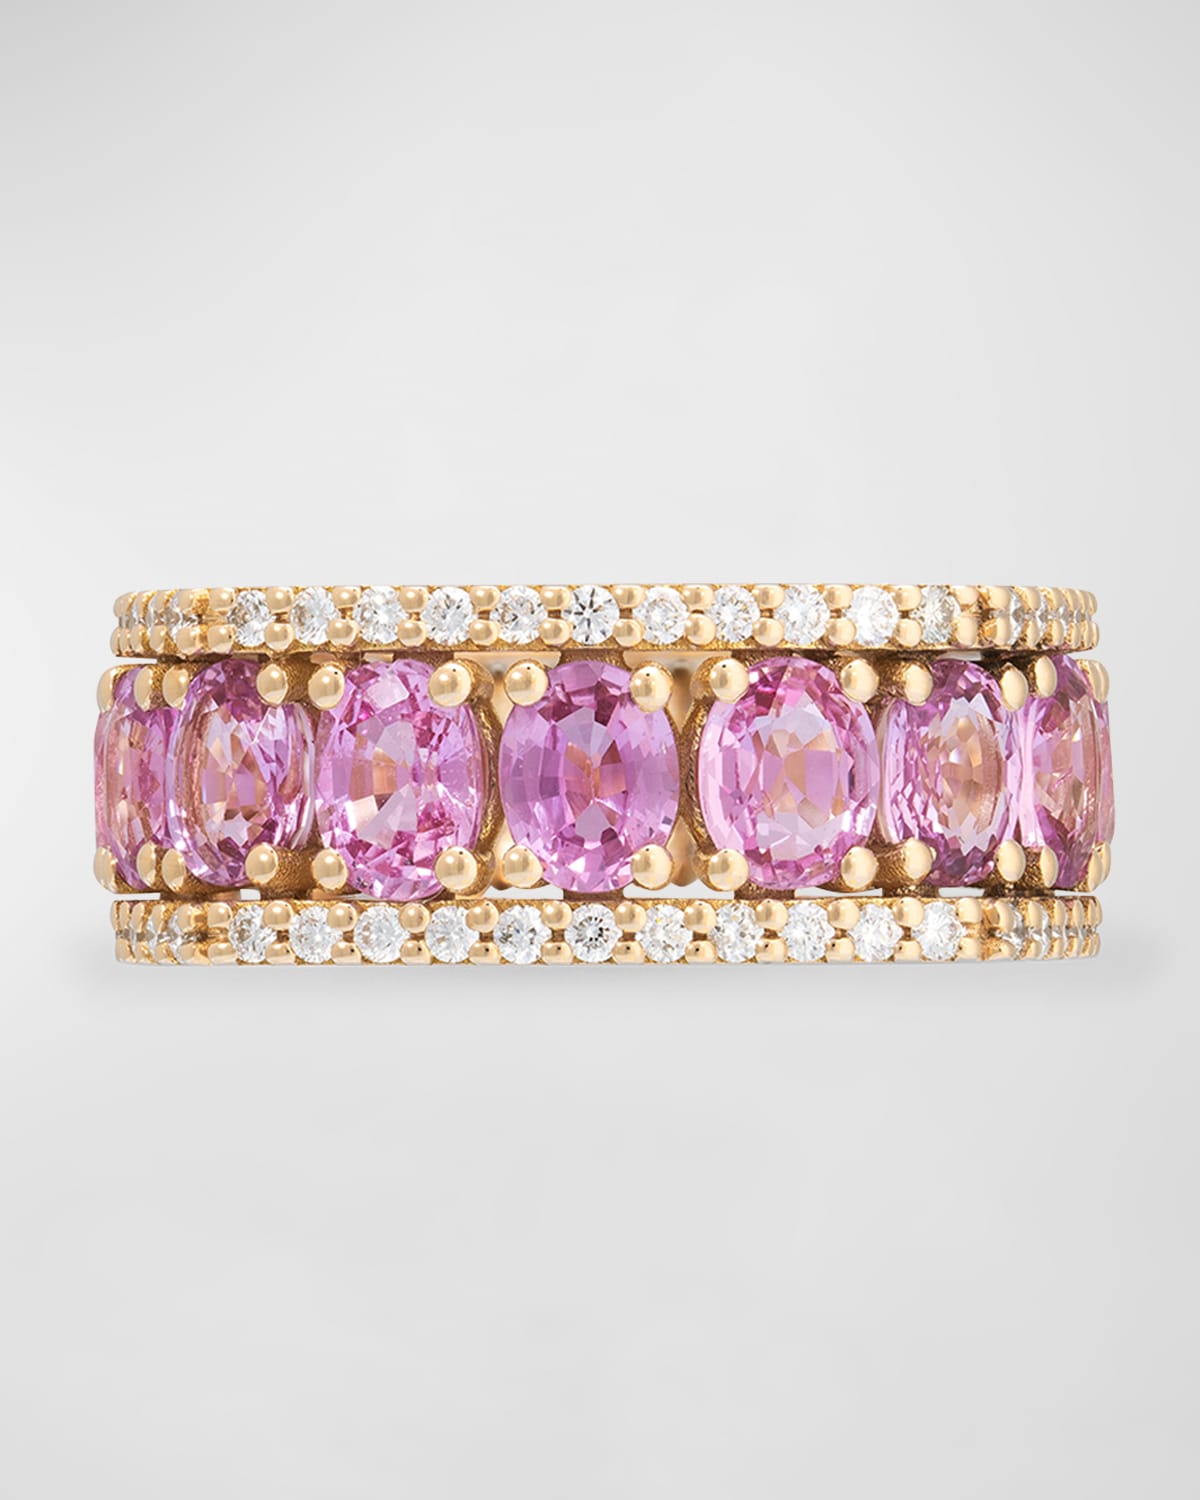 Procida 18K Yellow Gold Ring with White Diamonds and Pink Sapphires